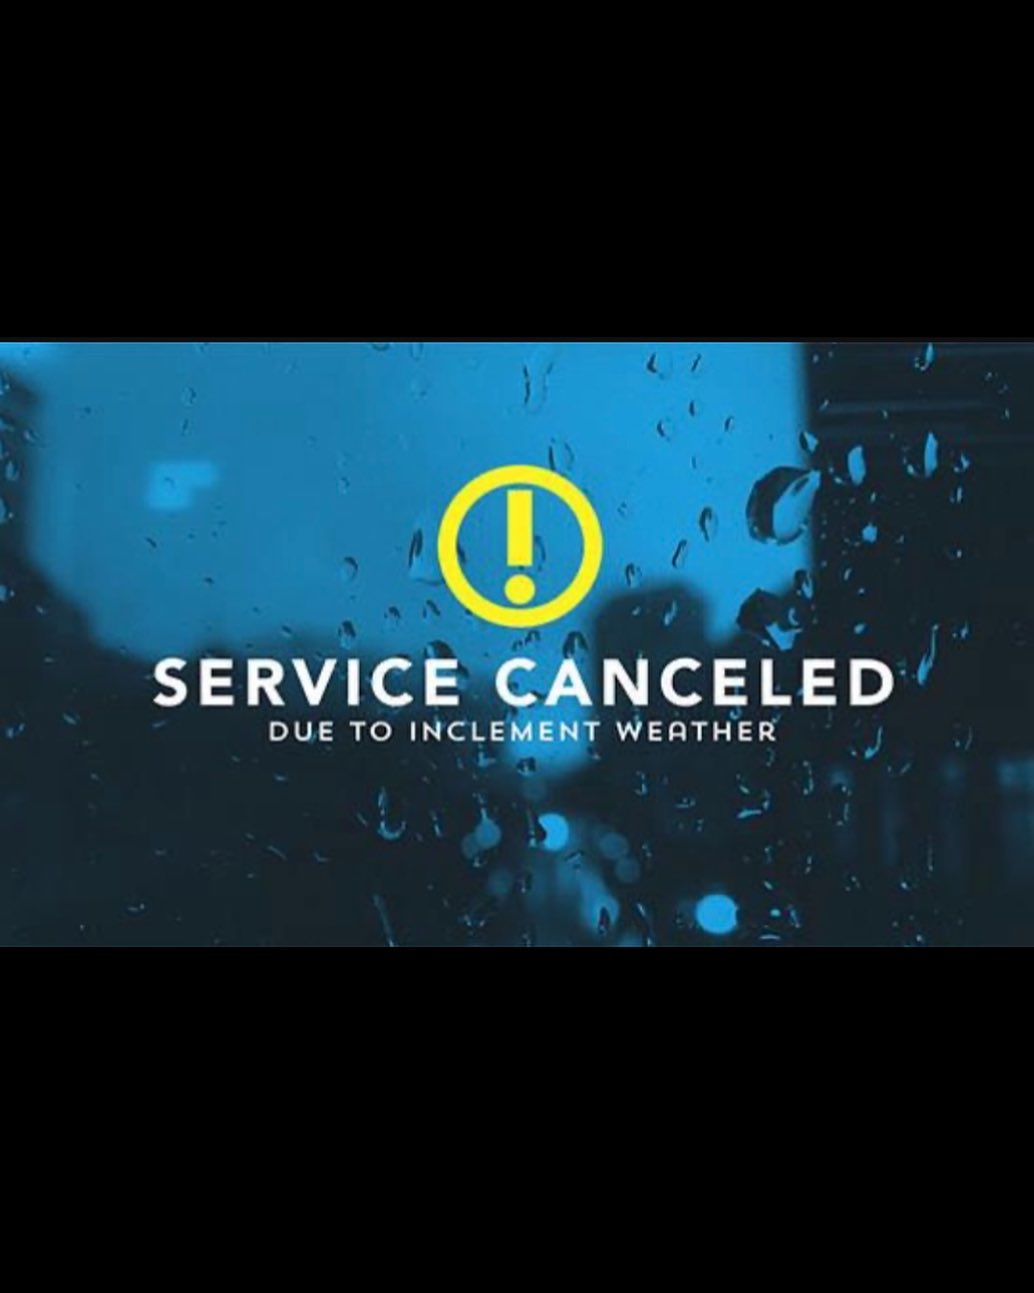 Thank You Lord for the rain. We will miss gathering @fallbrookvineyardchurch this Sunday. May the Lord bless you and keep you until we worship together again! Please share the cancellation with folks who may not be on social media. We love you!